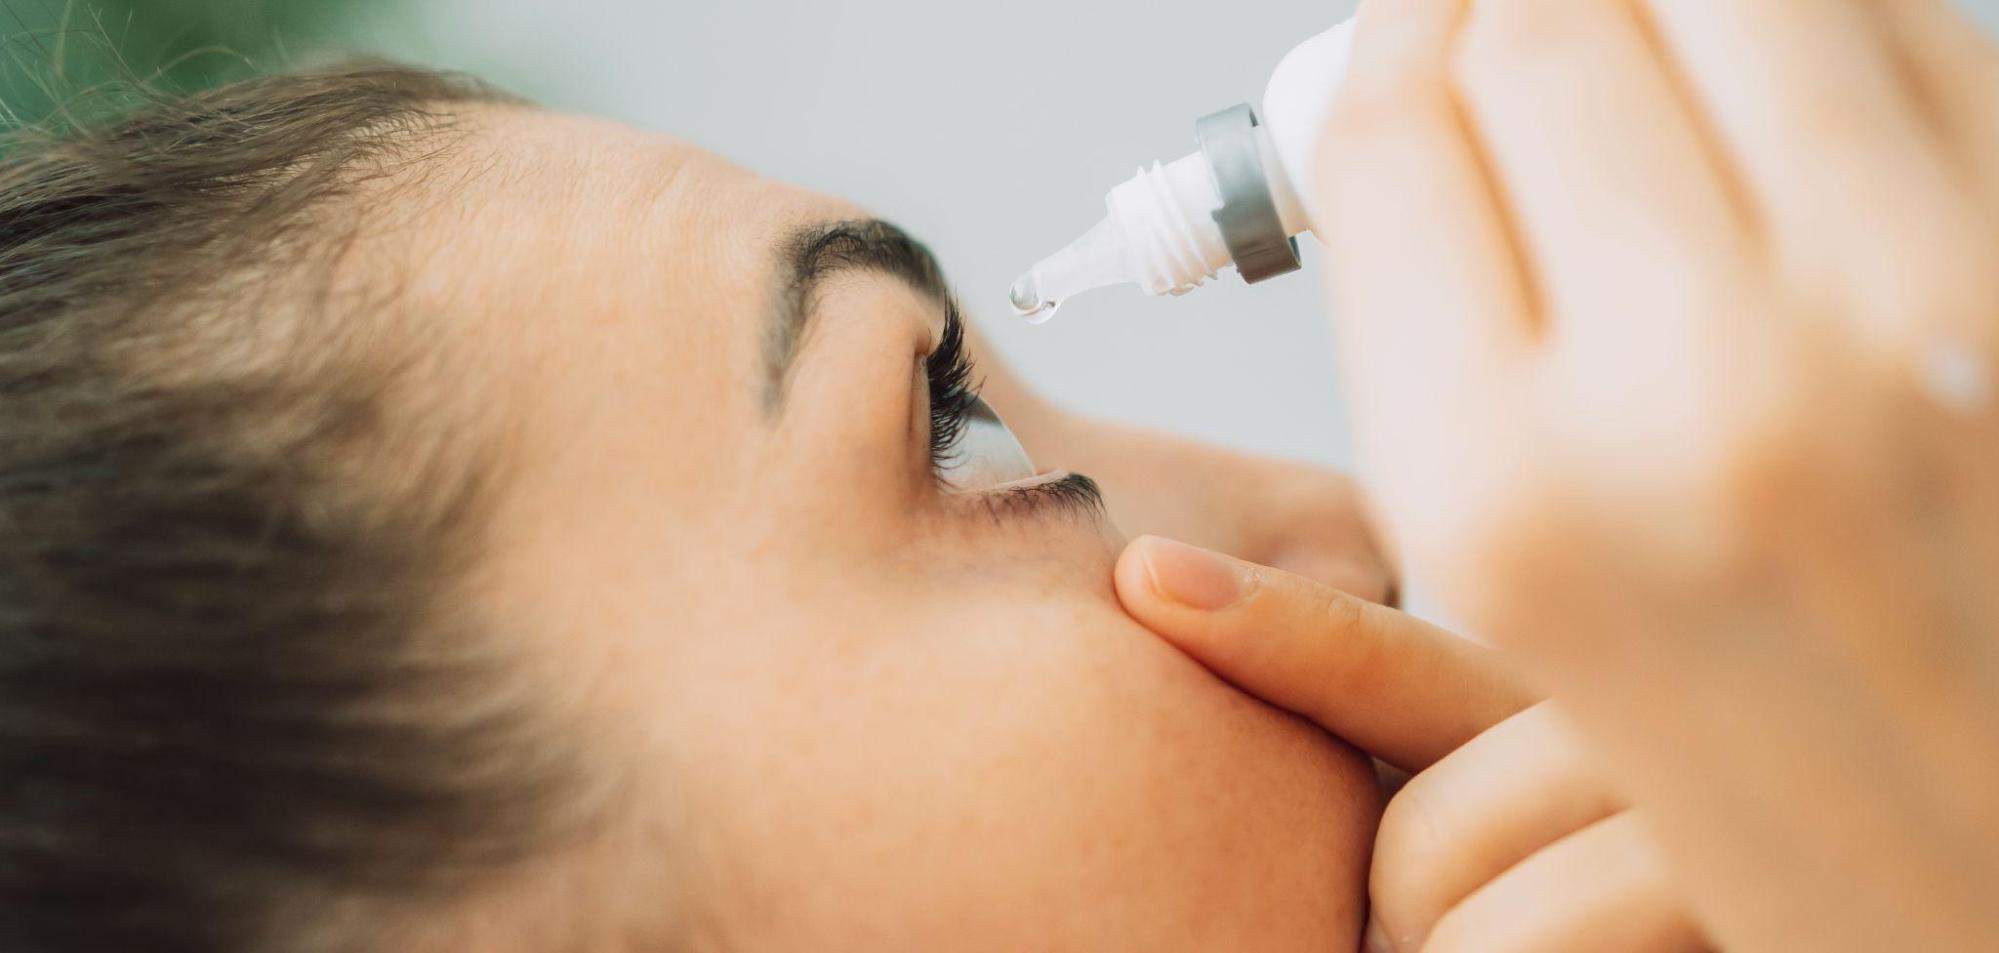 Why You Should Visit A Dry Eye Specialist For Treatment